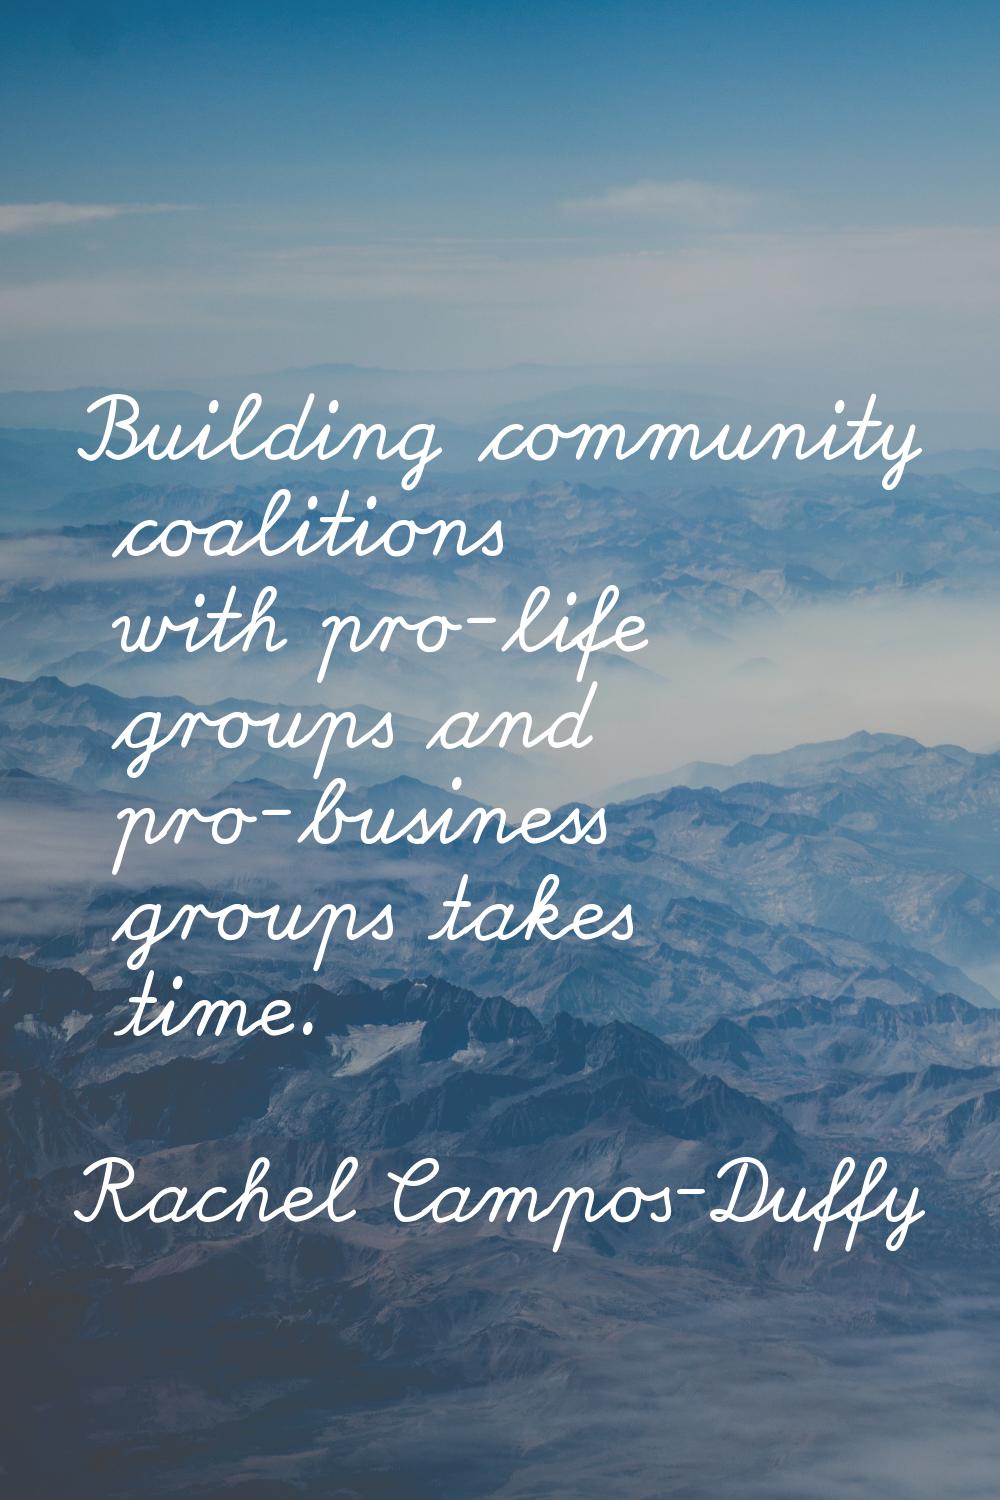 Building community coalitions with pro-life groups and pro-business groups takes time.